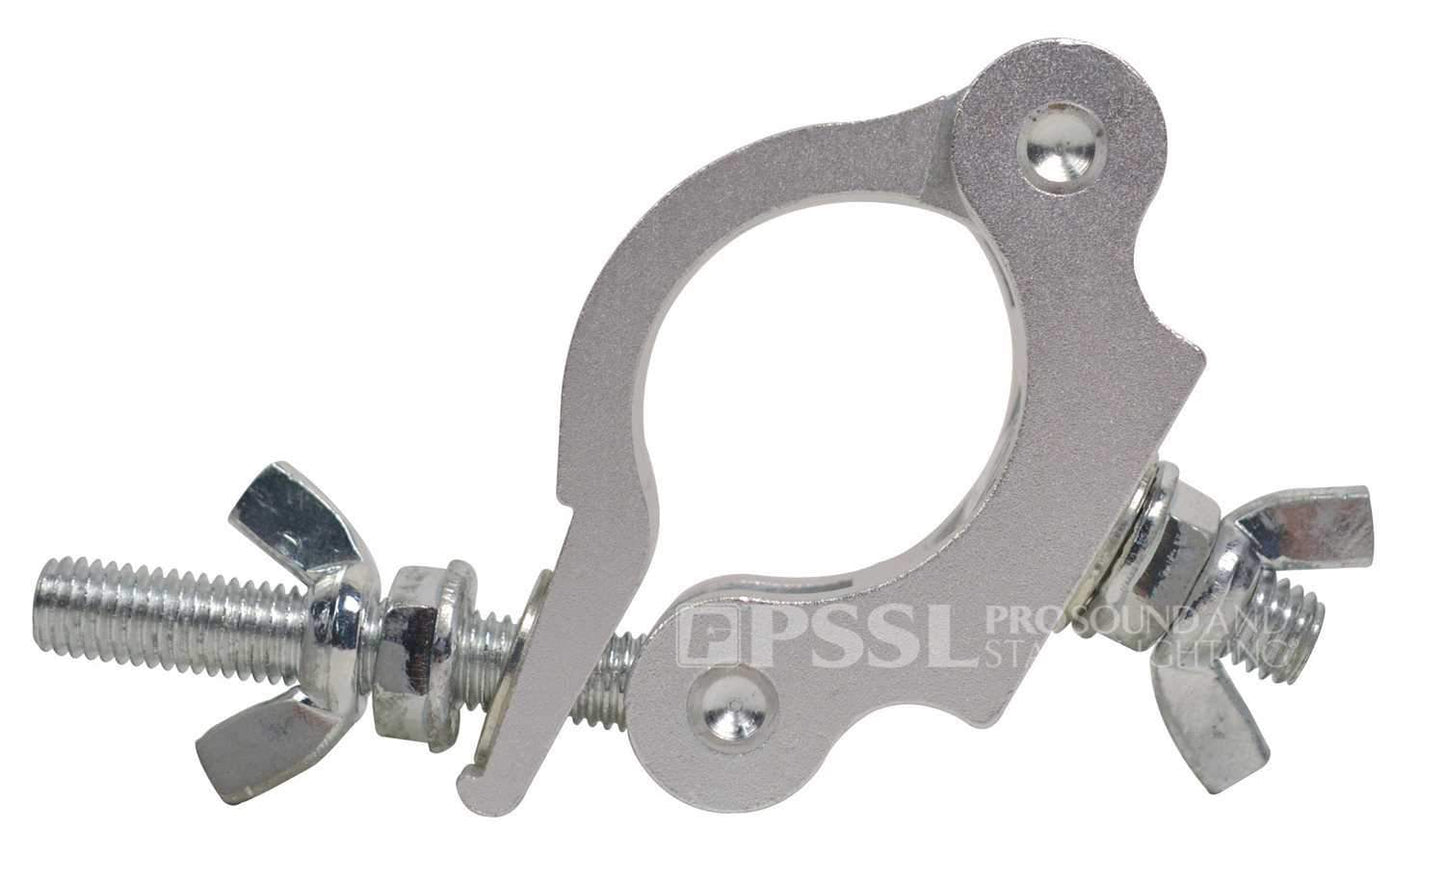 Chauvet Narrow Half Coupler Clamp For 2 In Truss - ProSound and Stage Lighting